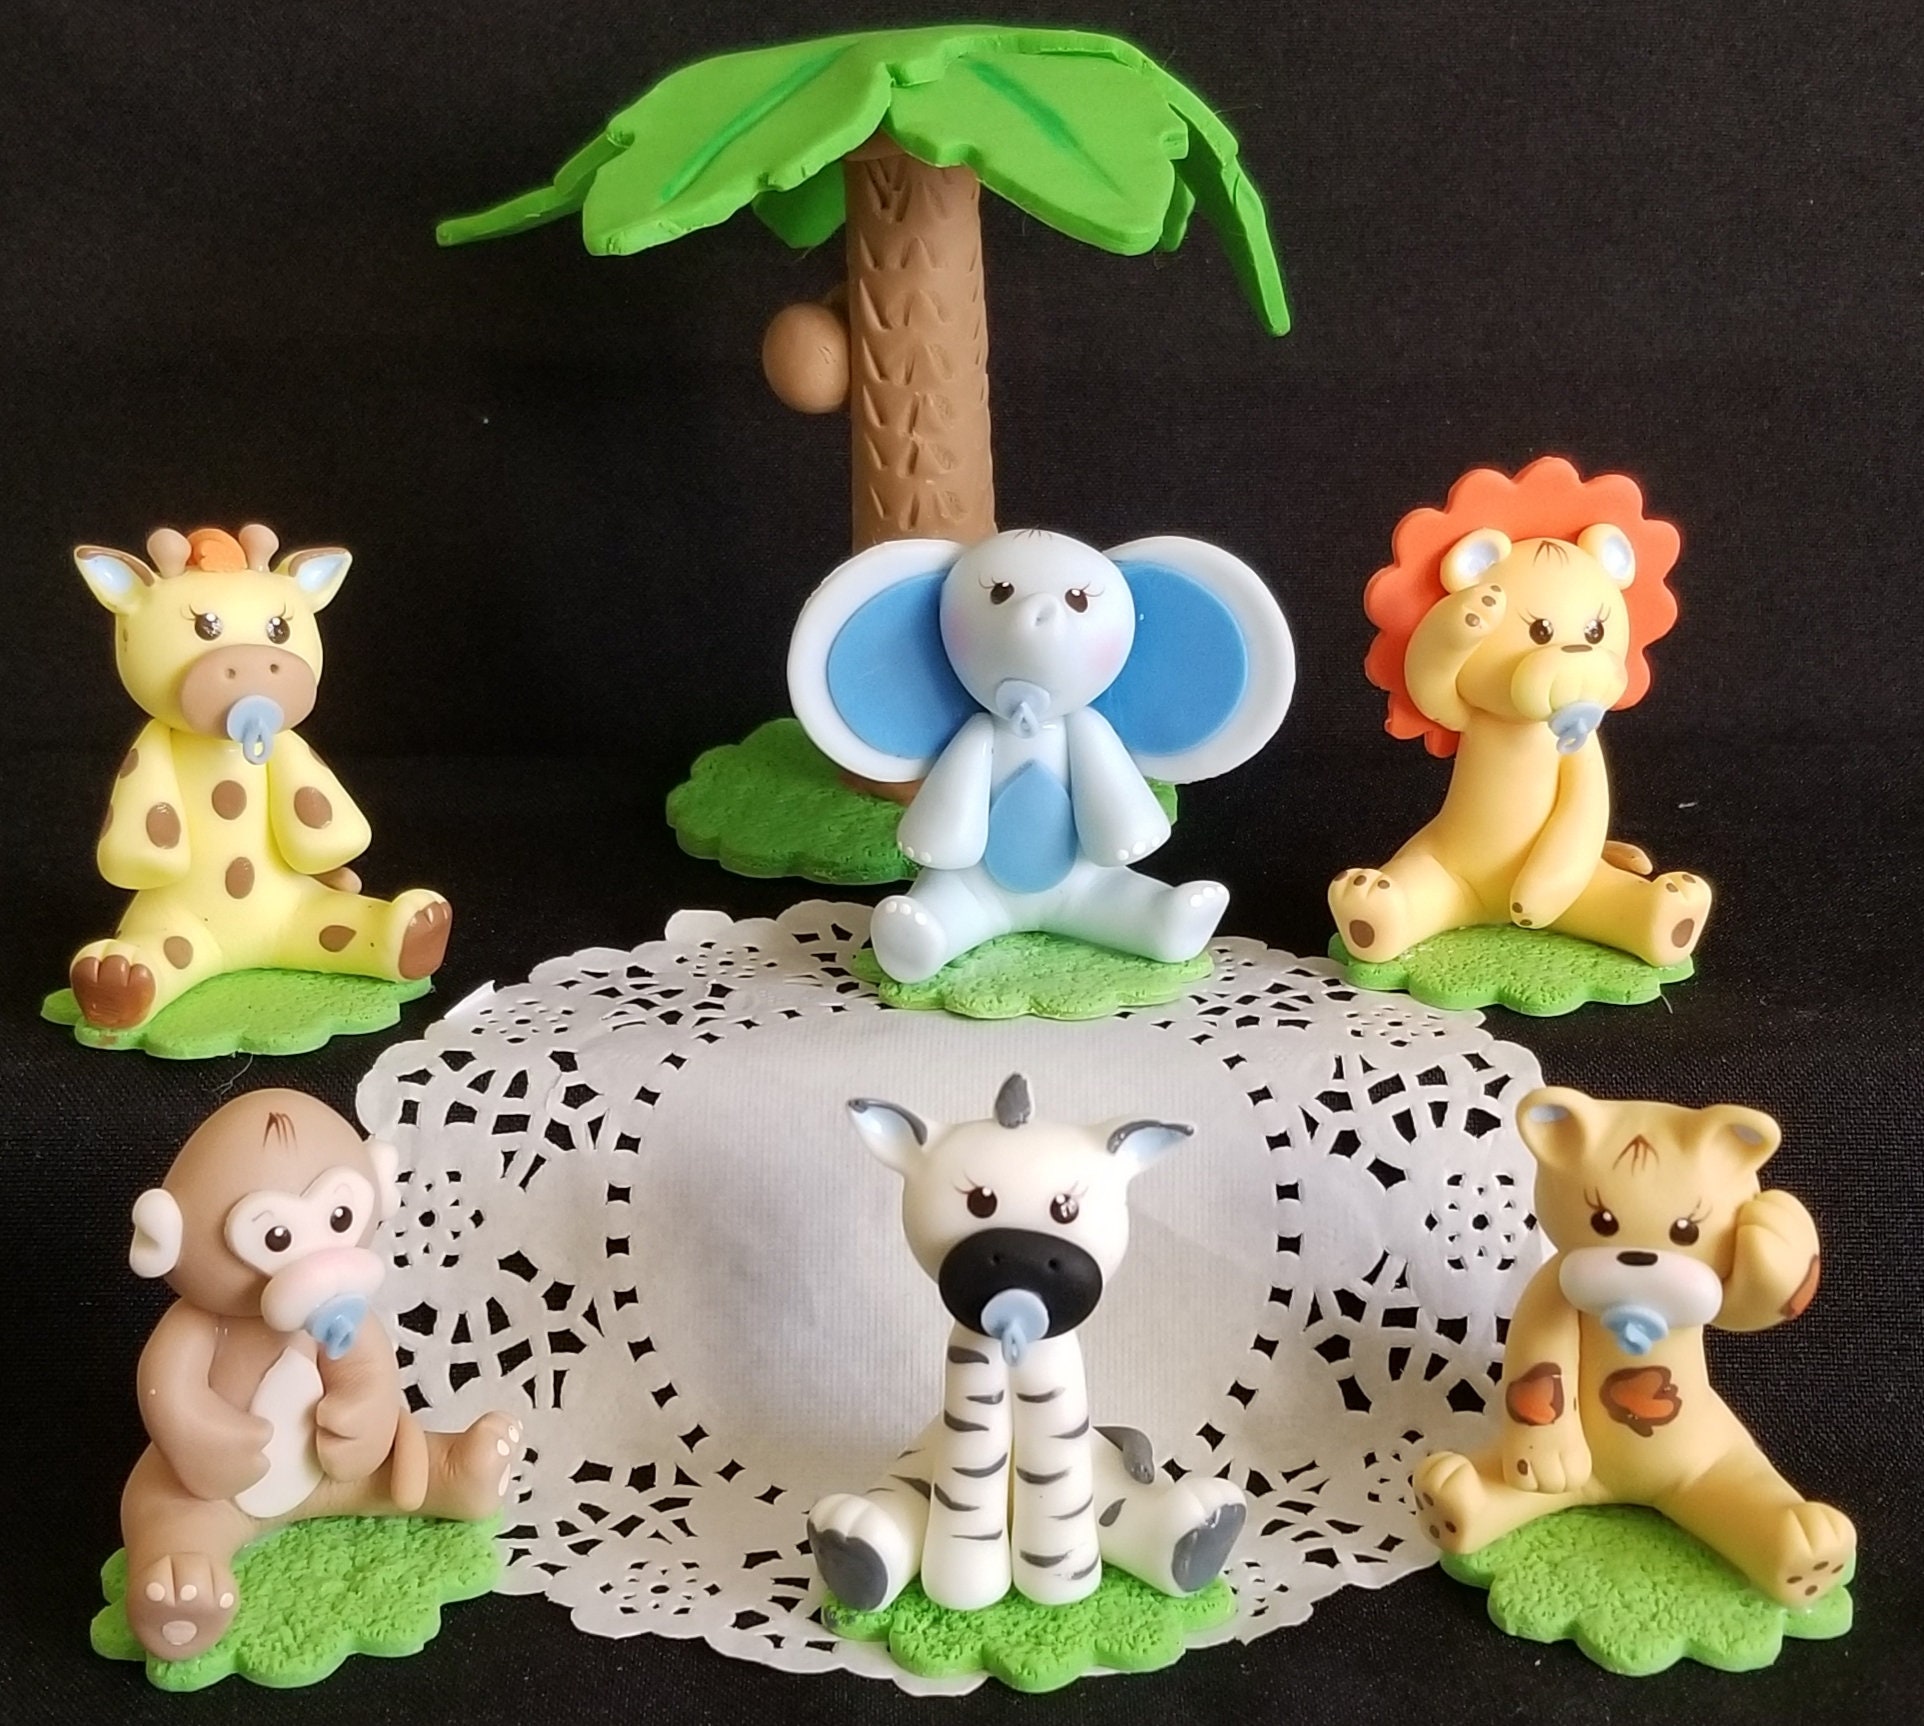 MONKEY TOPPER BIRTHDAY/BABY SHOWER DIAPER CAKE IN COLD PORCELAIN CENTERPIECE 